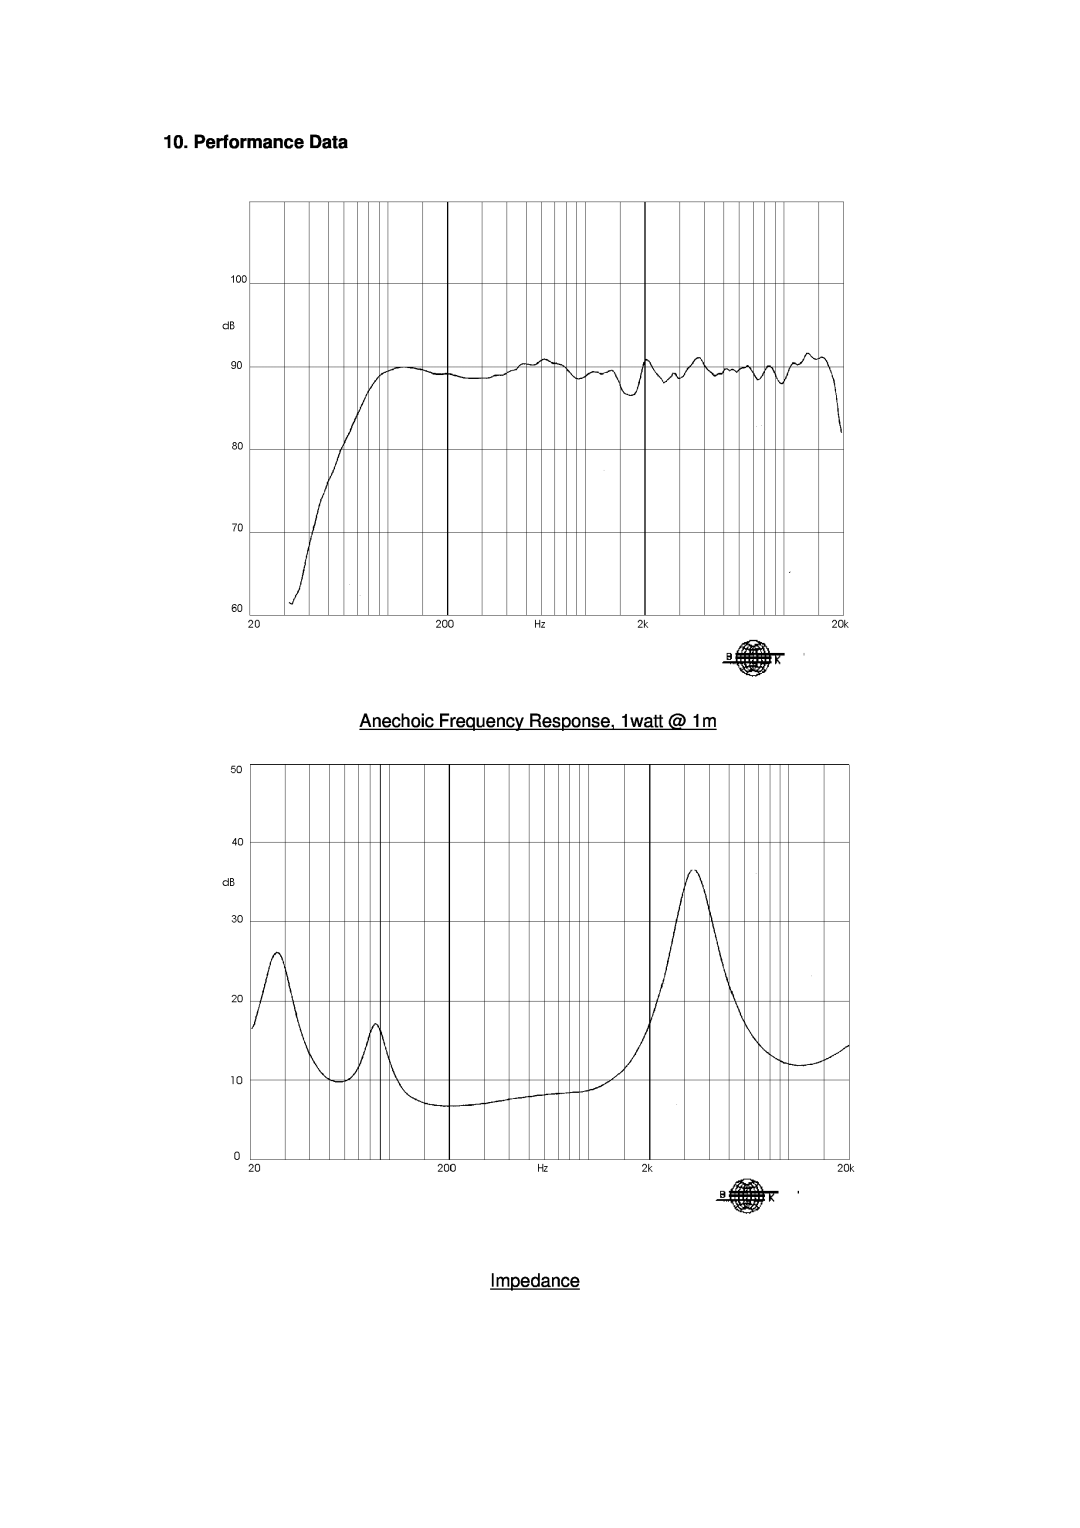 TOA Electronics I6 AW user manual Performance Data, Anechoic Frequency Response, 1watt @ 1m, Impedance 